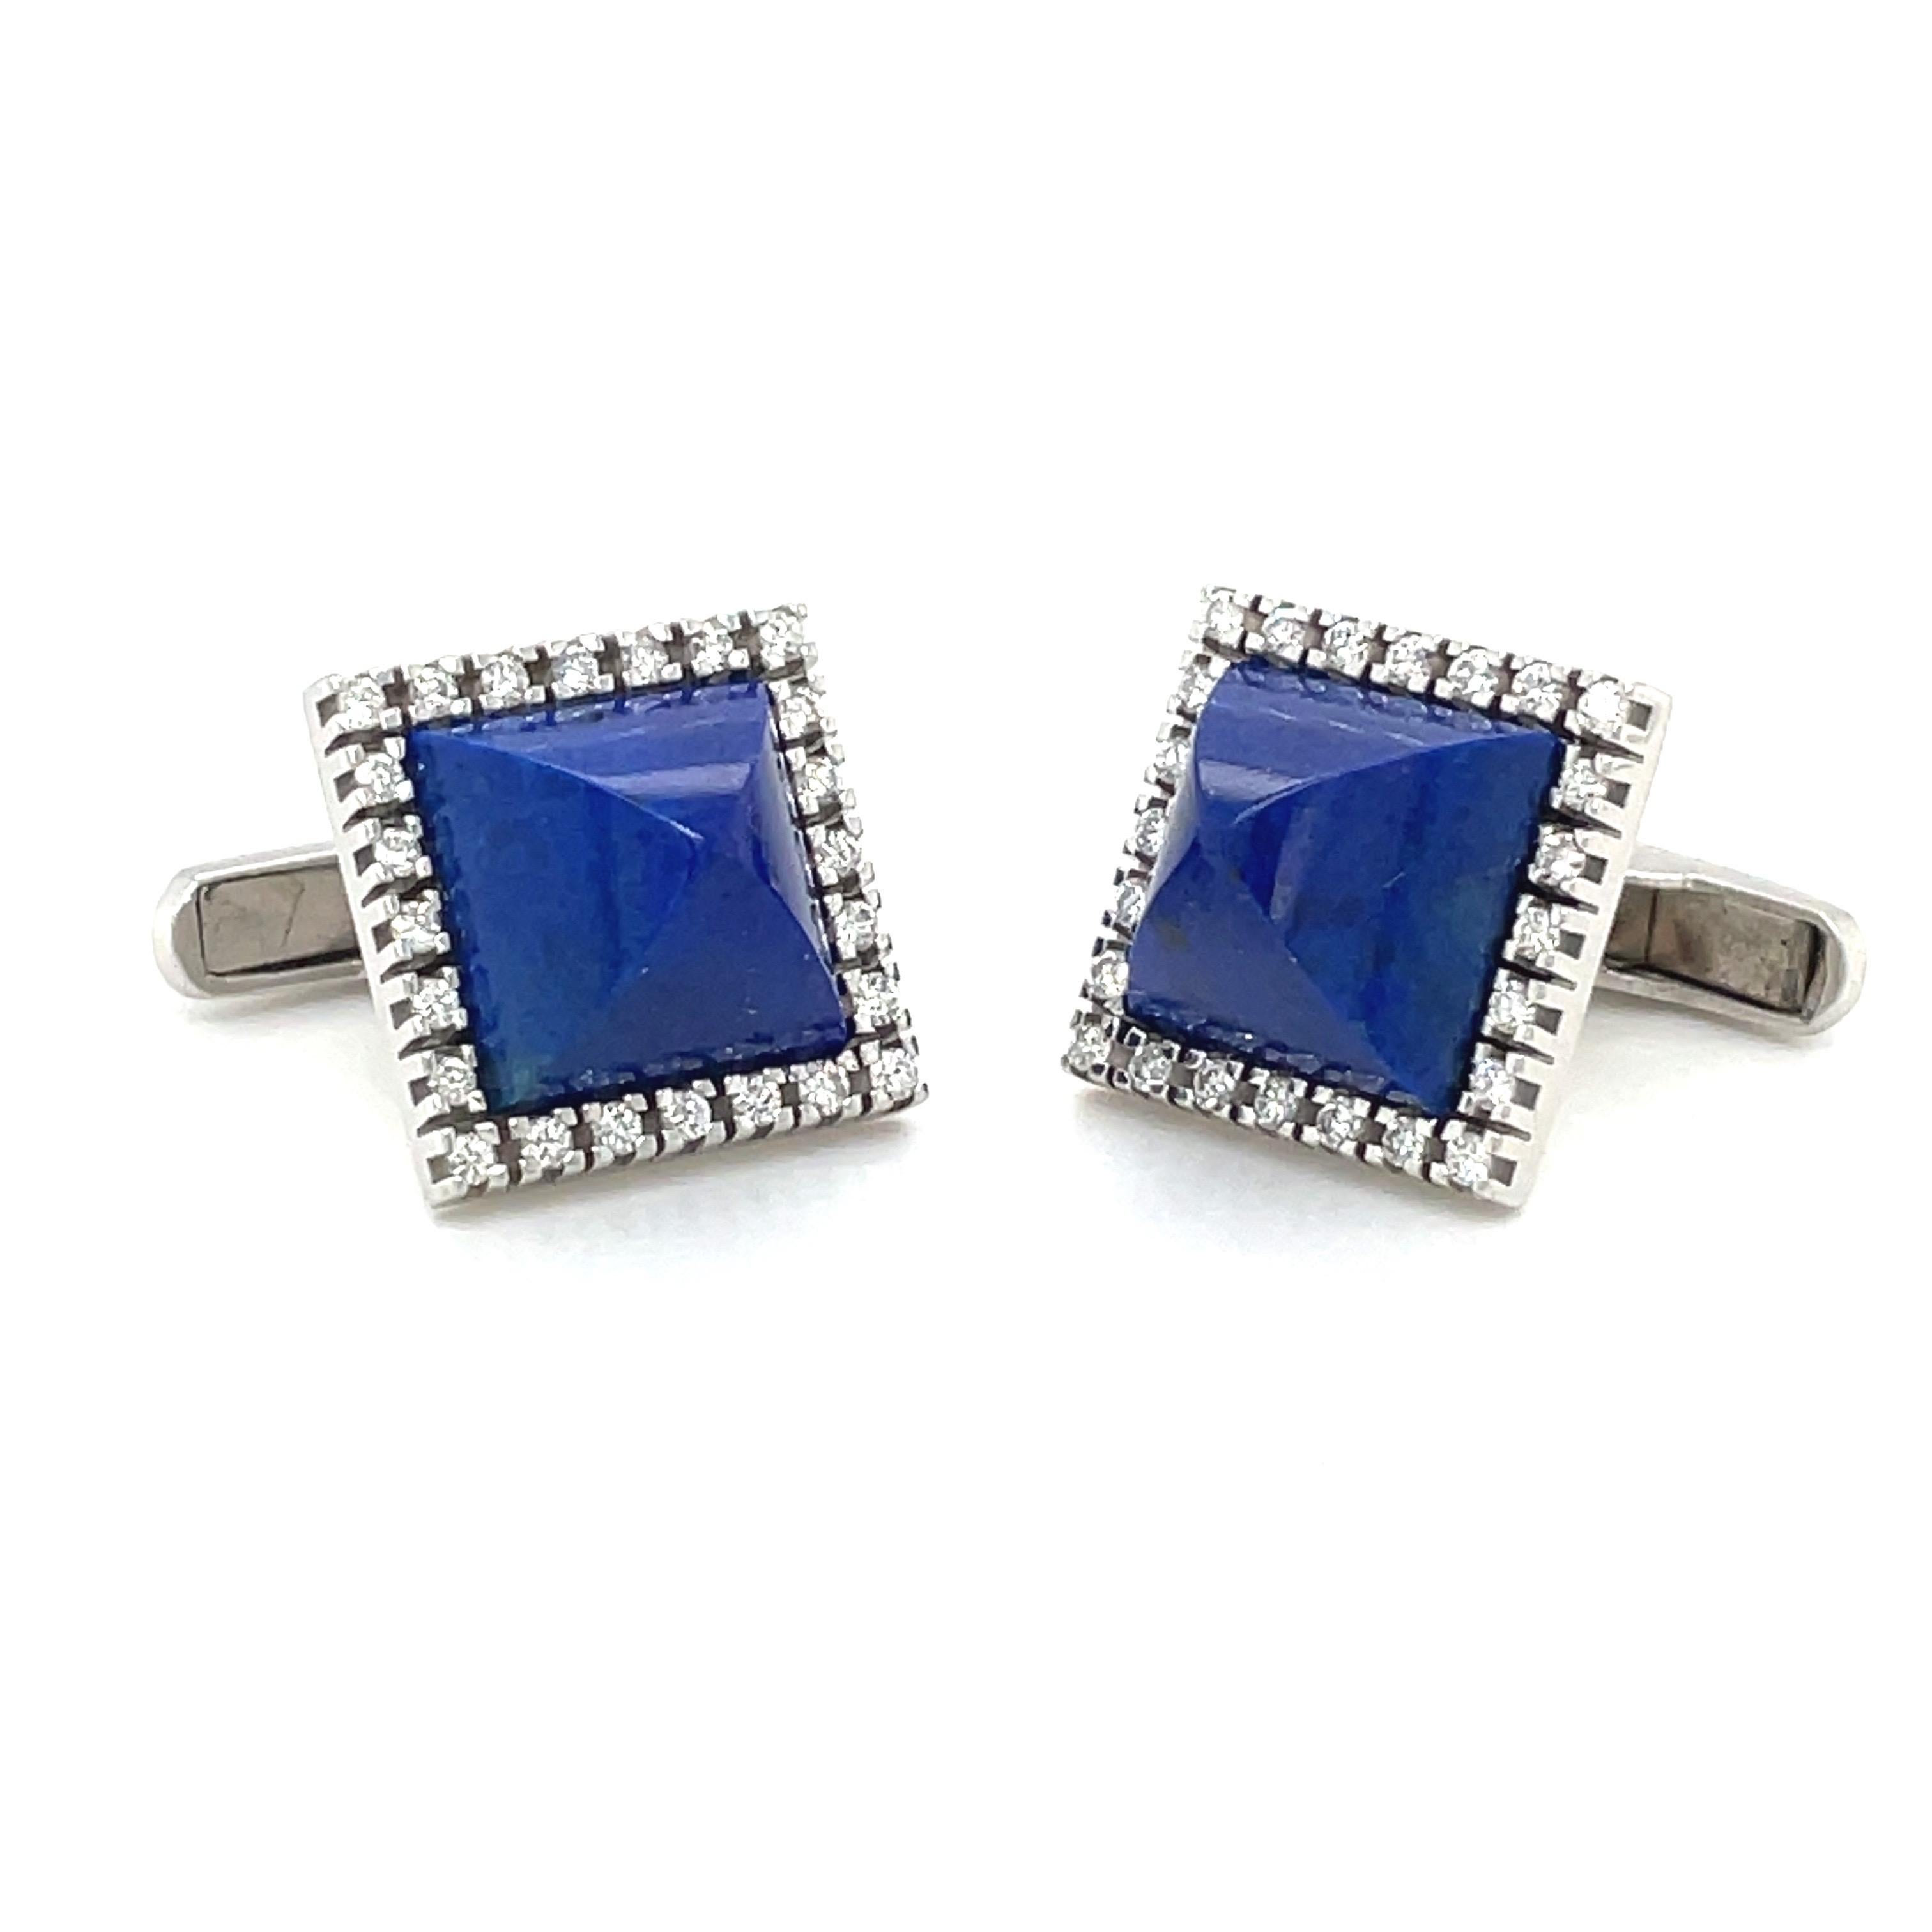 Retro style gorgeous 14 karat white gold square cuff links. The cuff links center large sugar loaf cut lapis lazuli stones with a border of round diamonds, 0.96 carats. They measure 17.3 mm and are the bar style.
Stamped AB 14K